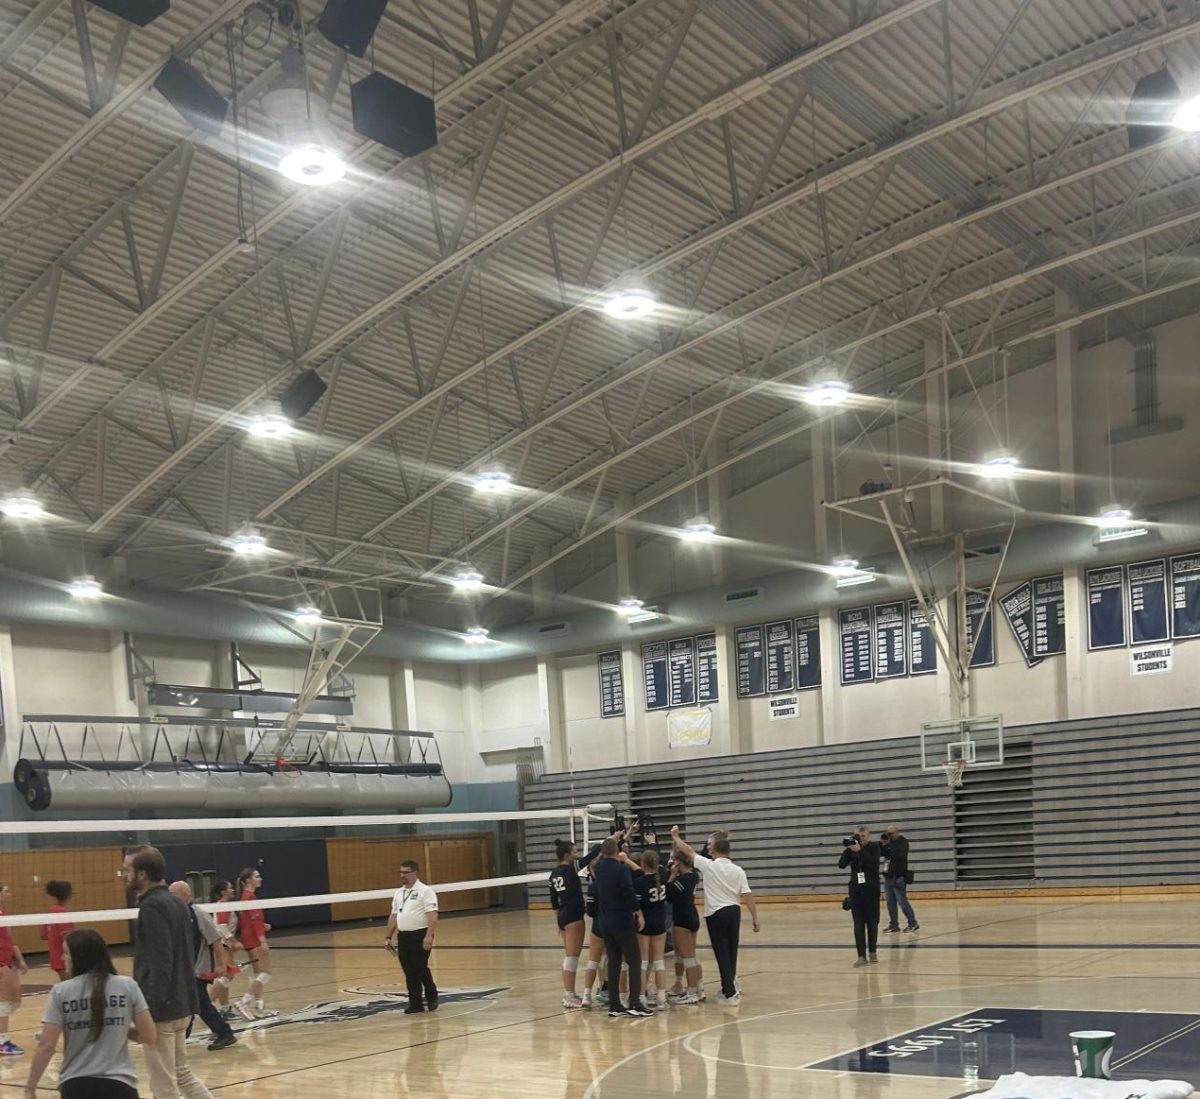 Wilsonvilles volleyball team are seen celebrating together. After powering through an eventful four sets, they win the game.